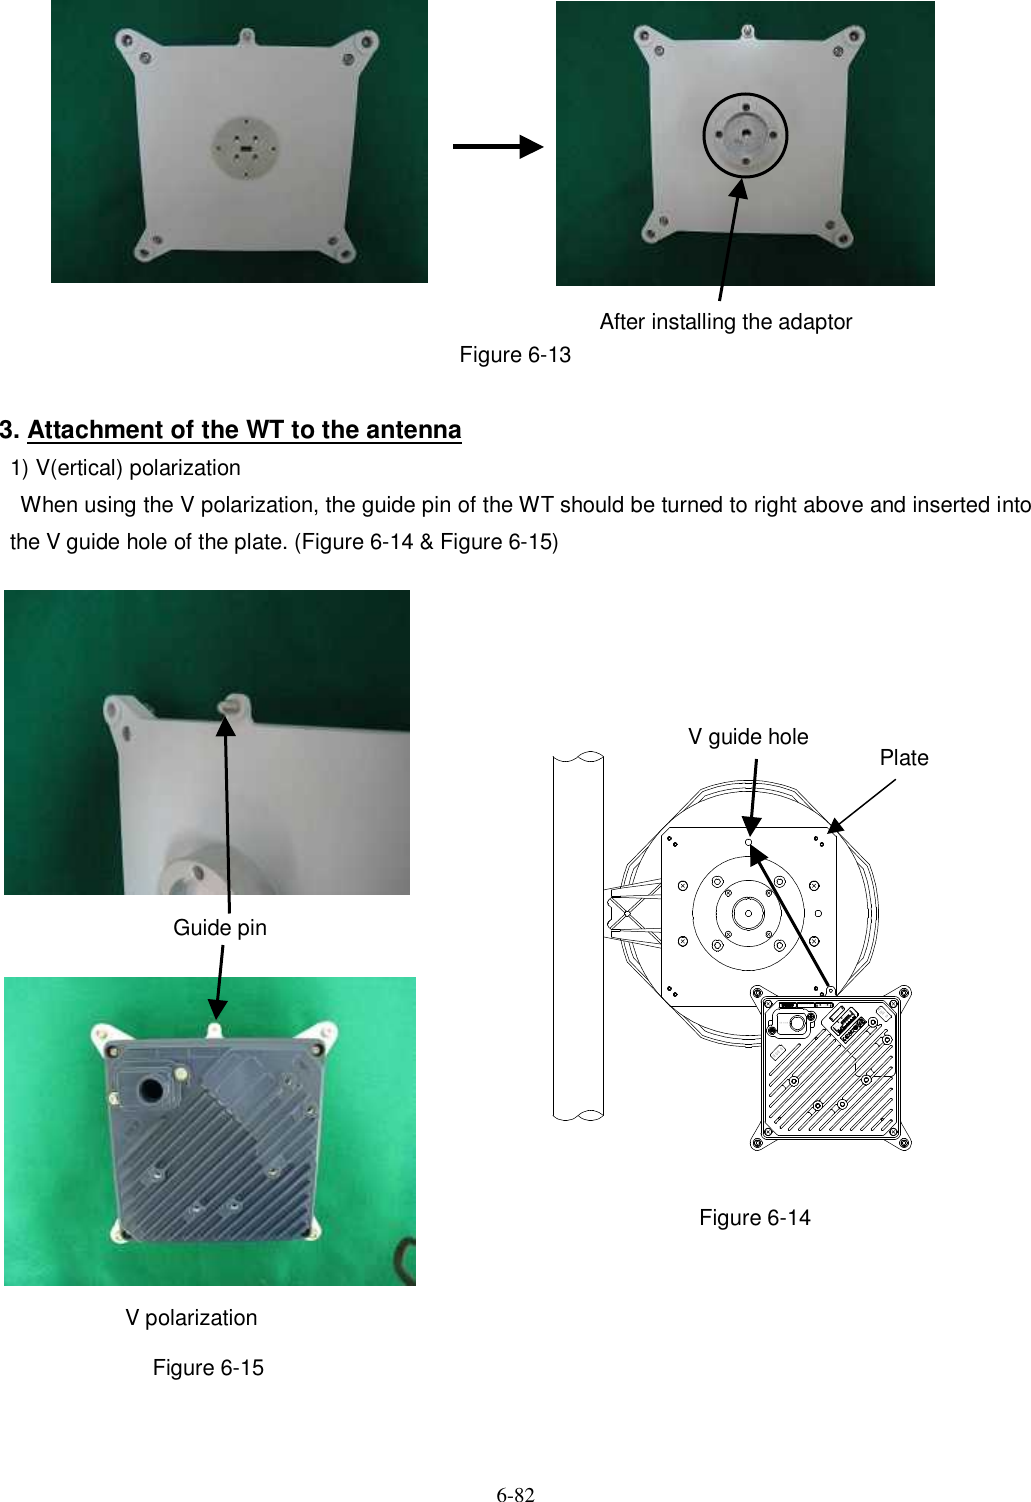   6-82            Figure 6-13  3. Attachment of the WT to the antenna 1) V(ertical) polarization     When using the V polarization, the guide pin of the WT should be turned to right above and inserted into the V guide hole of the plate. (Figure 6-14 &amp; Figure 6-15)                                  Figure 6-14           Figure 6-15   V polarization Guide pin Ｉ Ｃ： ７６ ８ Ｂ−Ｎ Ｔ Ｇ３ ３７ 注 ５ＴＯＰＶＴ ＯＰ ＨＥＴ Ｈ ＥＲＩＮ Ｐ ＵＴ：Ｓ Ｅ Ｒ ． ＮＯ：Ｍ Ａ Ｃ ：．： ： ： ： ：ＭＡ Ｄ ＥＩ Ｎ ＪＡＰ Ａ ＮＤＣ２４Ｖ０．７ＡＴＹＰＥＷ−ＷＴ ＜注 １＞Ｆ Ｃ ＣＩＤ：Ｃ ＫＥＮＴＧ３３７ − 注 １ＷＴ ＥＬ２ＭＯ Ｄ Ｅ Ｌ： Ｎ Ｔ Ｇ −３ ３ ７ 注２ ＲV guide hole Plate After installing the adaptor 